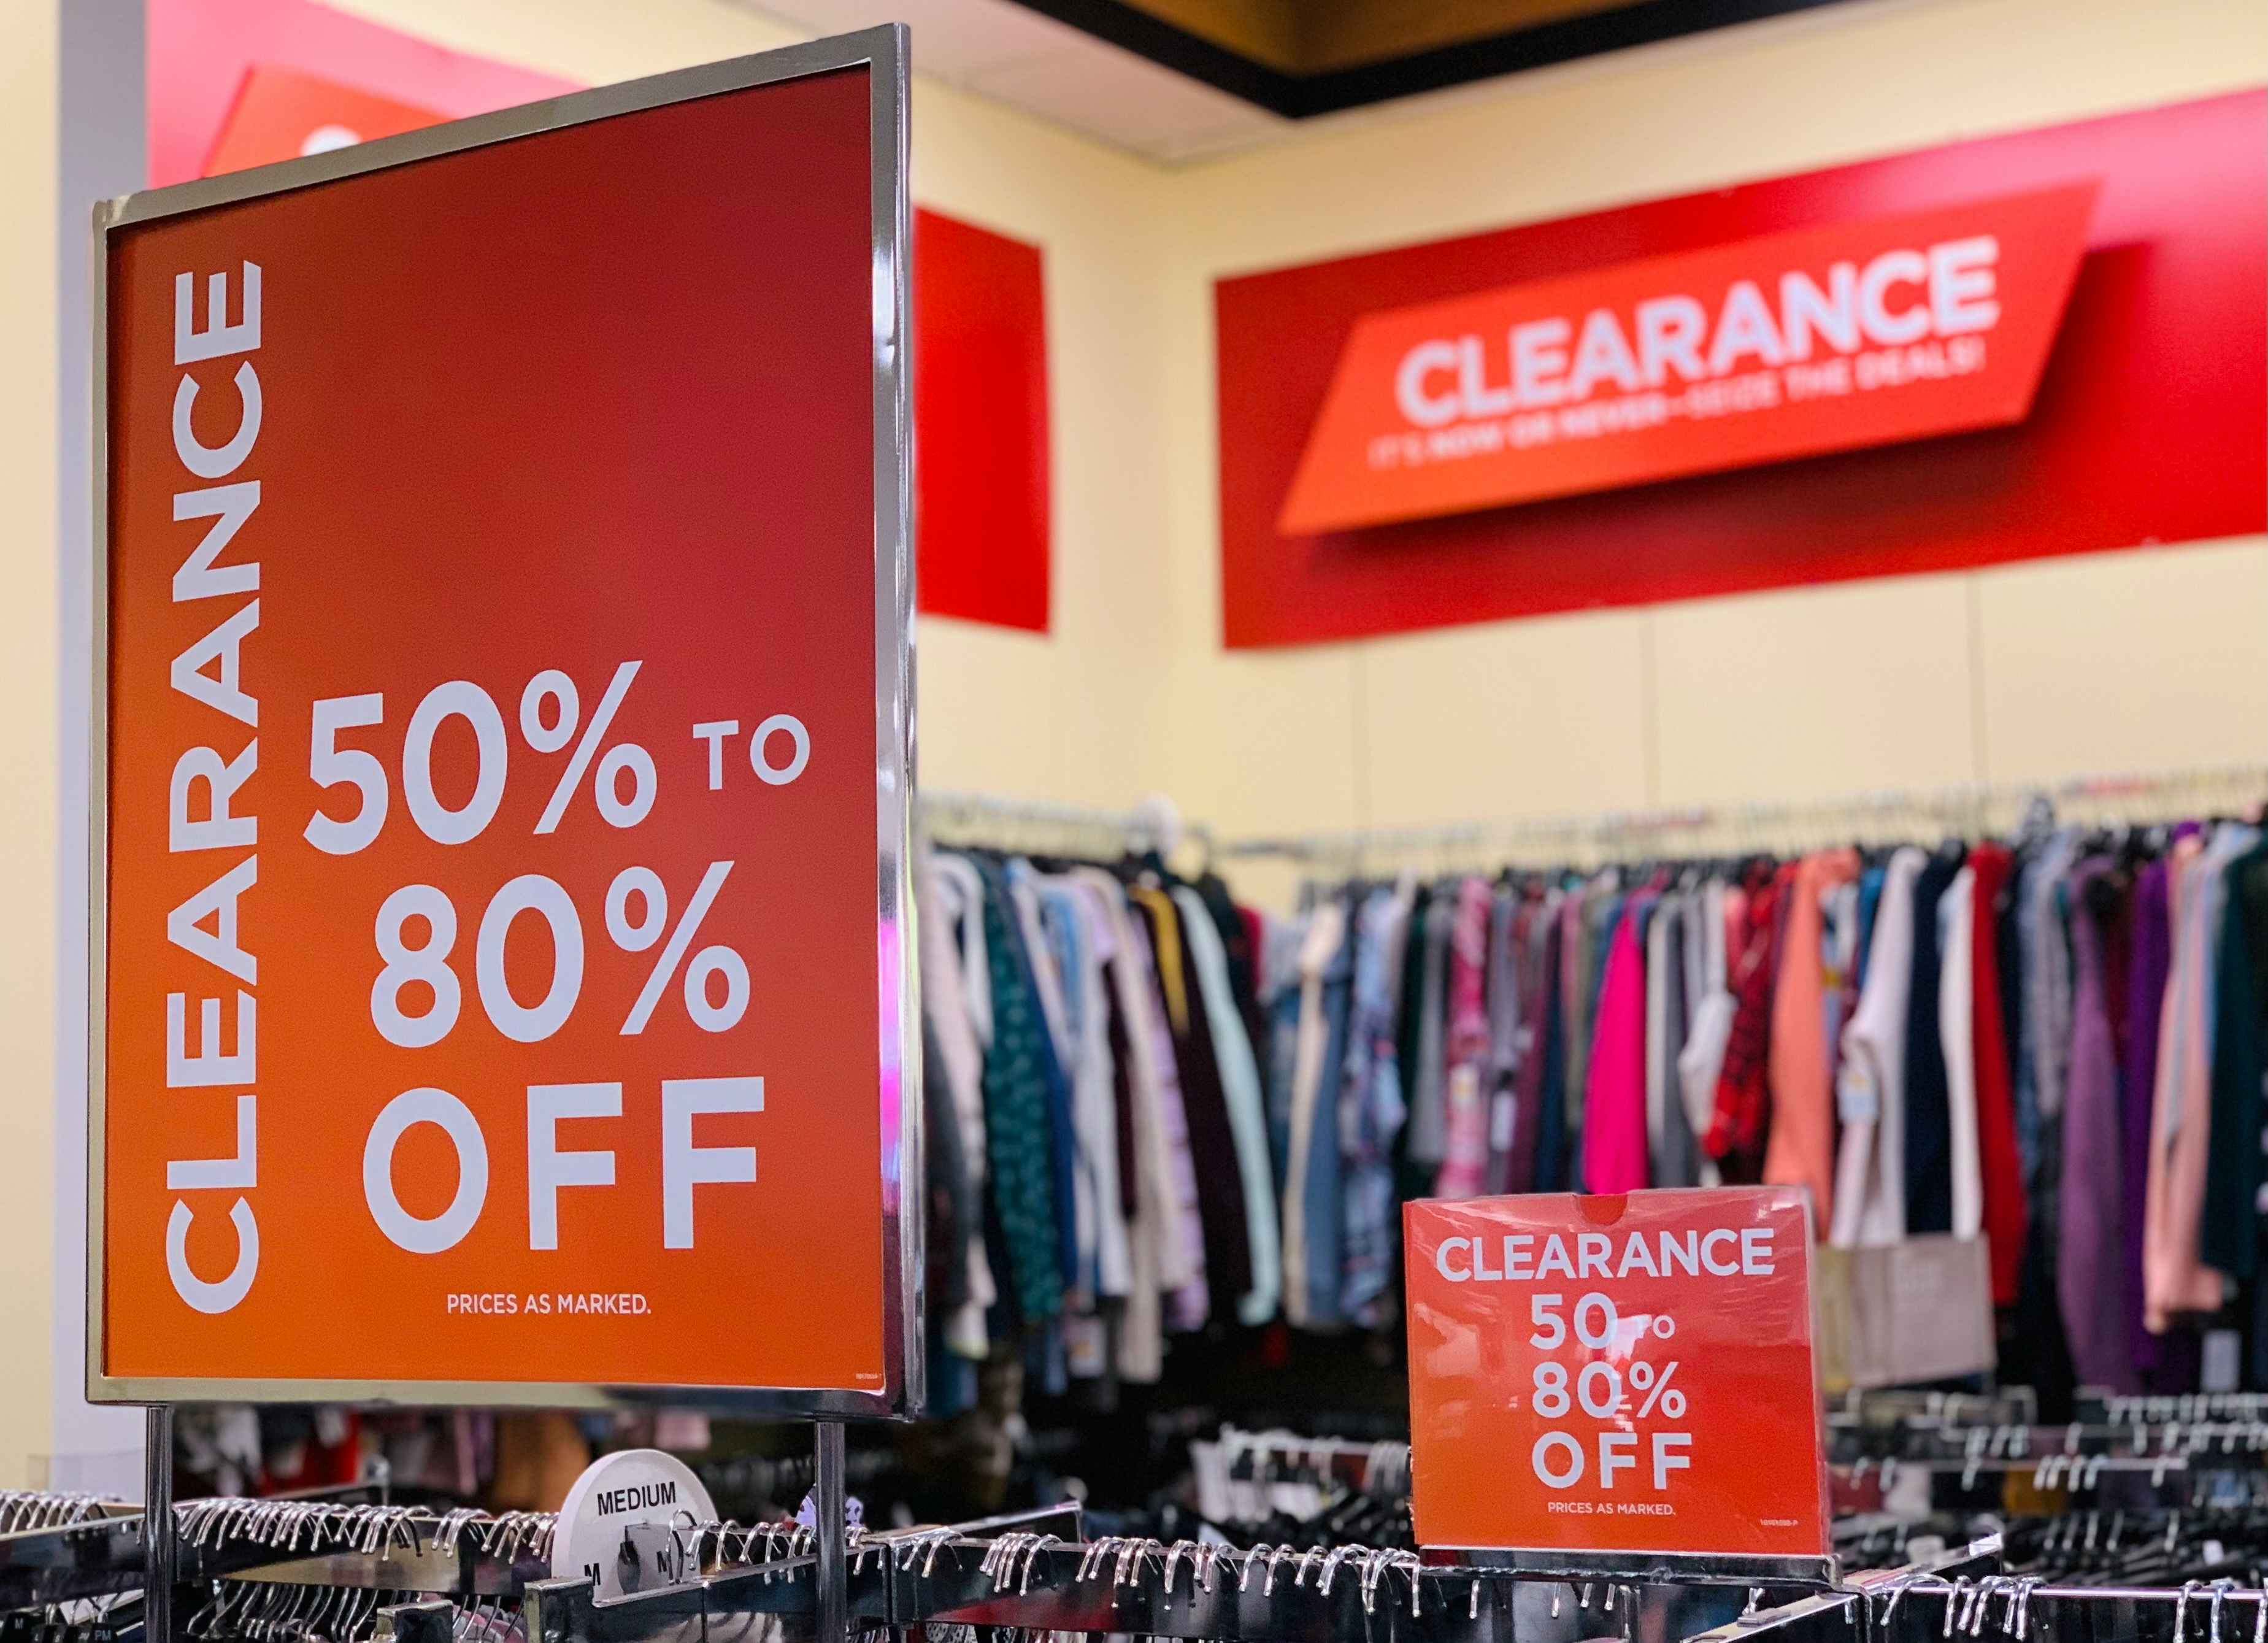 Kohls in store clearance racks with 50% to 80% off signs